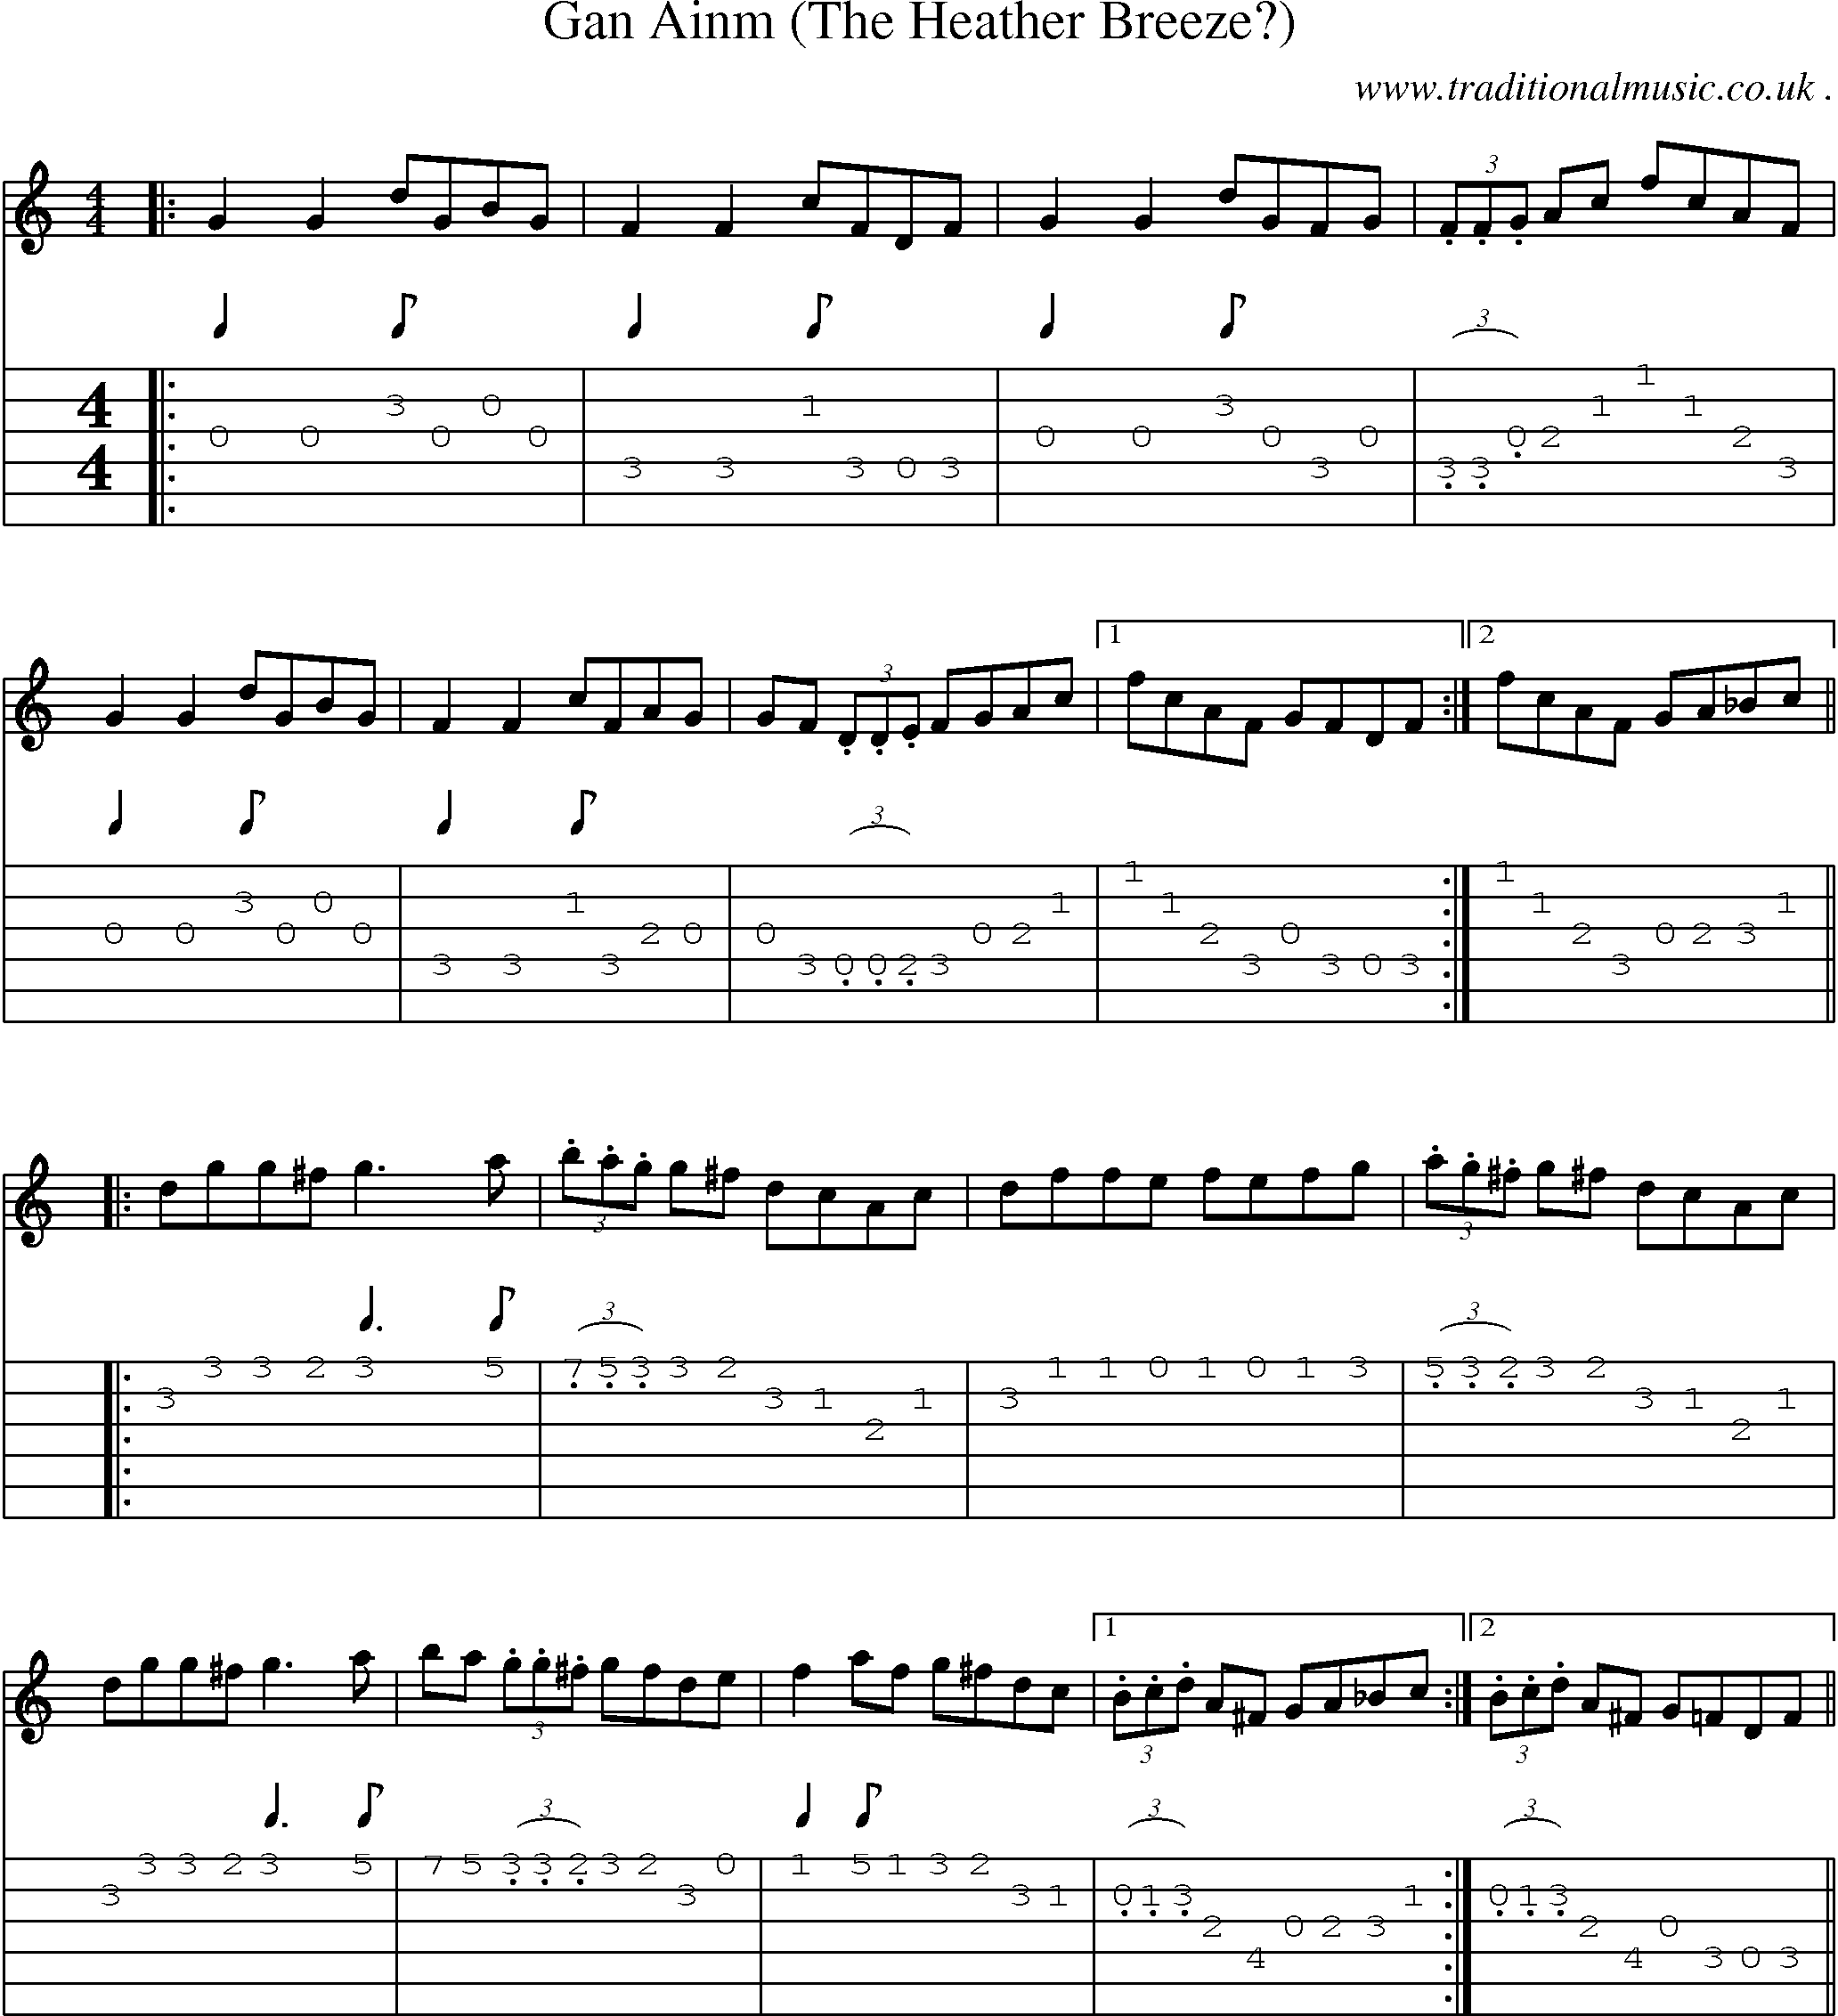 Sheet-Music and Guitar Tabs for Gan Ainm (the Heather Breeze)